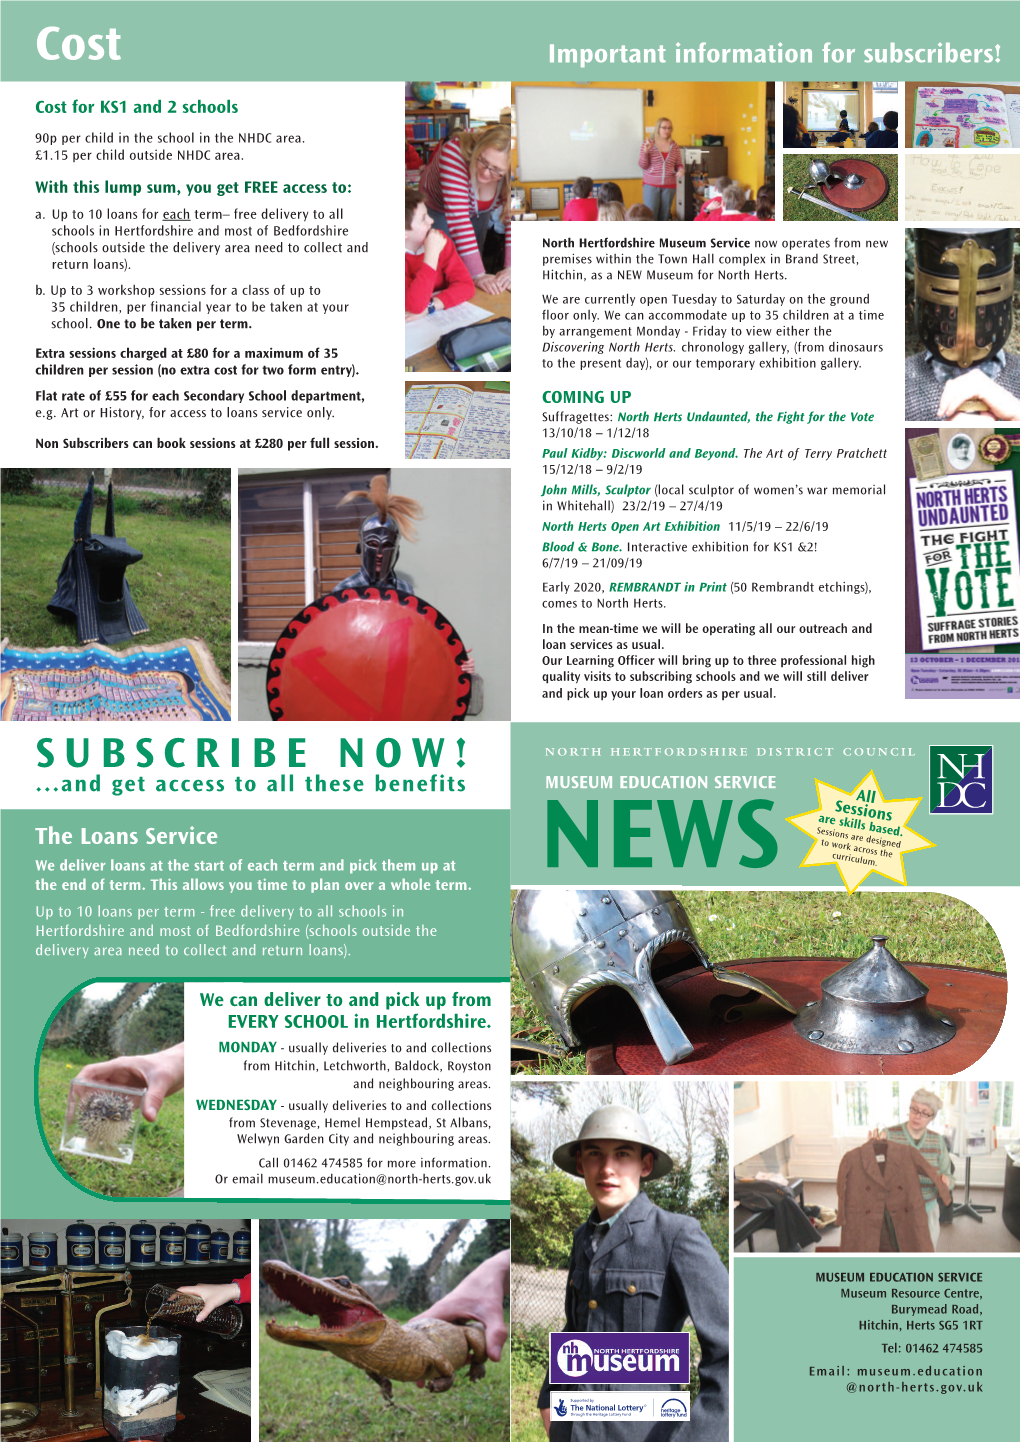 SUBSCRIBE NOW! NORTH HERTFORDSHIRE DISTRICT COUNCIL MUSEUM EDUCATION SERVICE ...And Get Access to All These Benefits All Sessions Are Skills Based